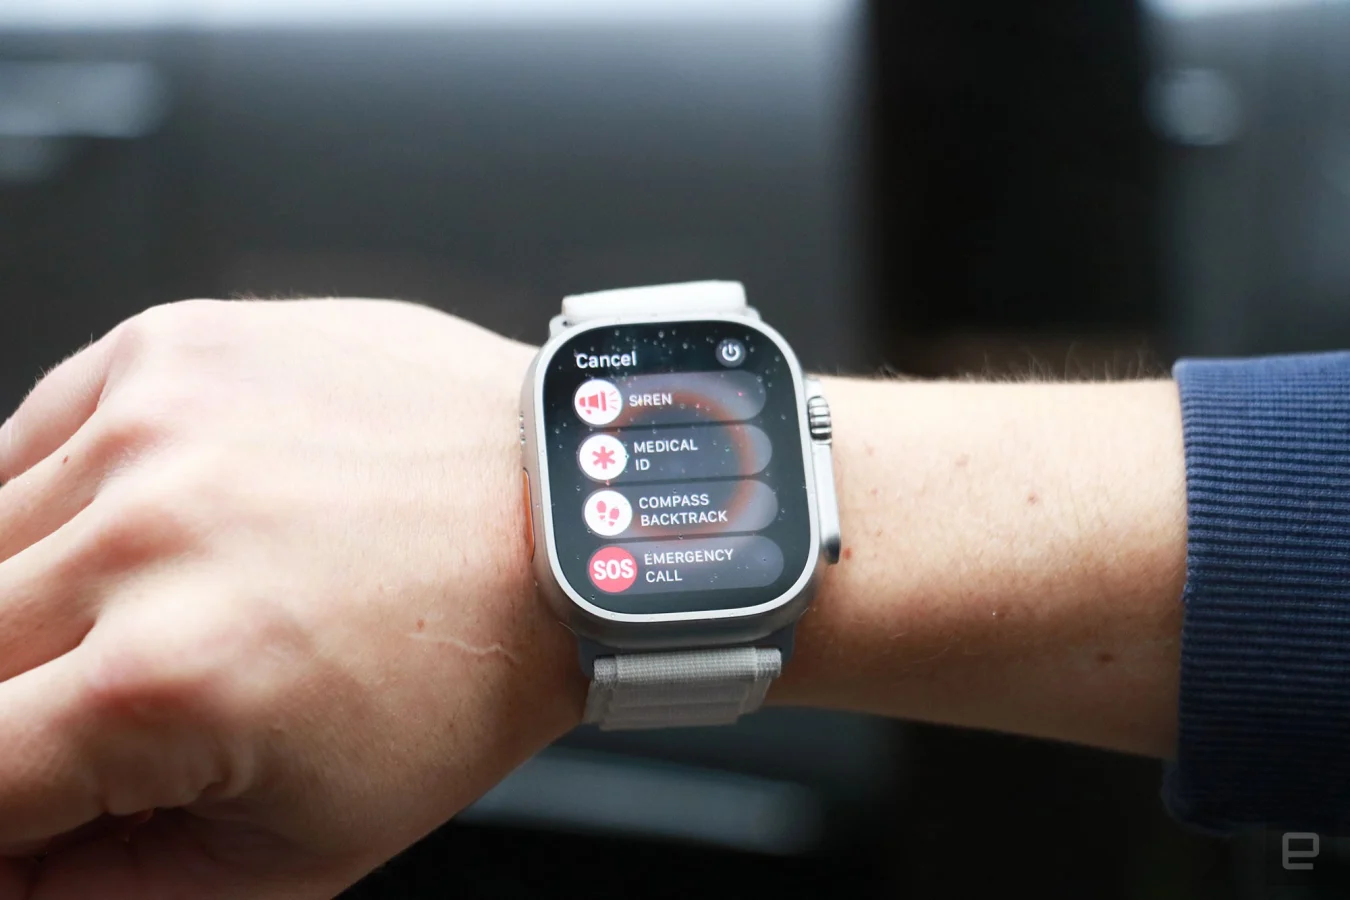 The Apple Watch Ultra with alpine loop on a person's wrist, showing the emergency menu. Options on display are, from top to bottom, Siren, Medical ID, Compass Backtrack and Emergency Call.